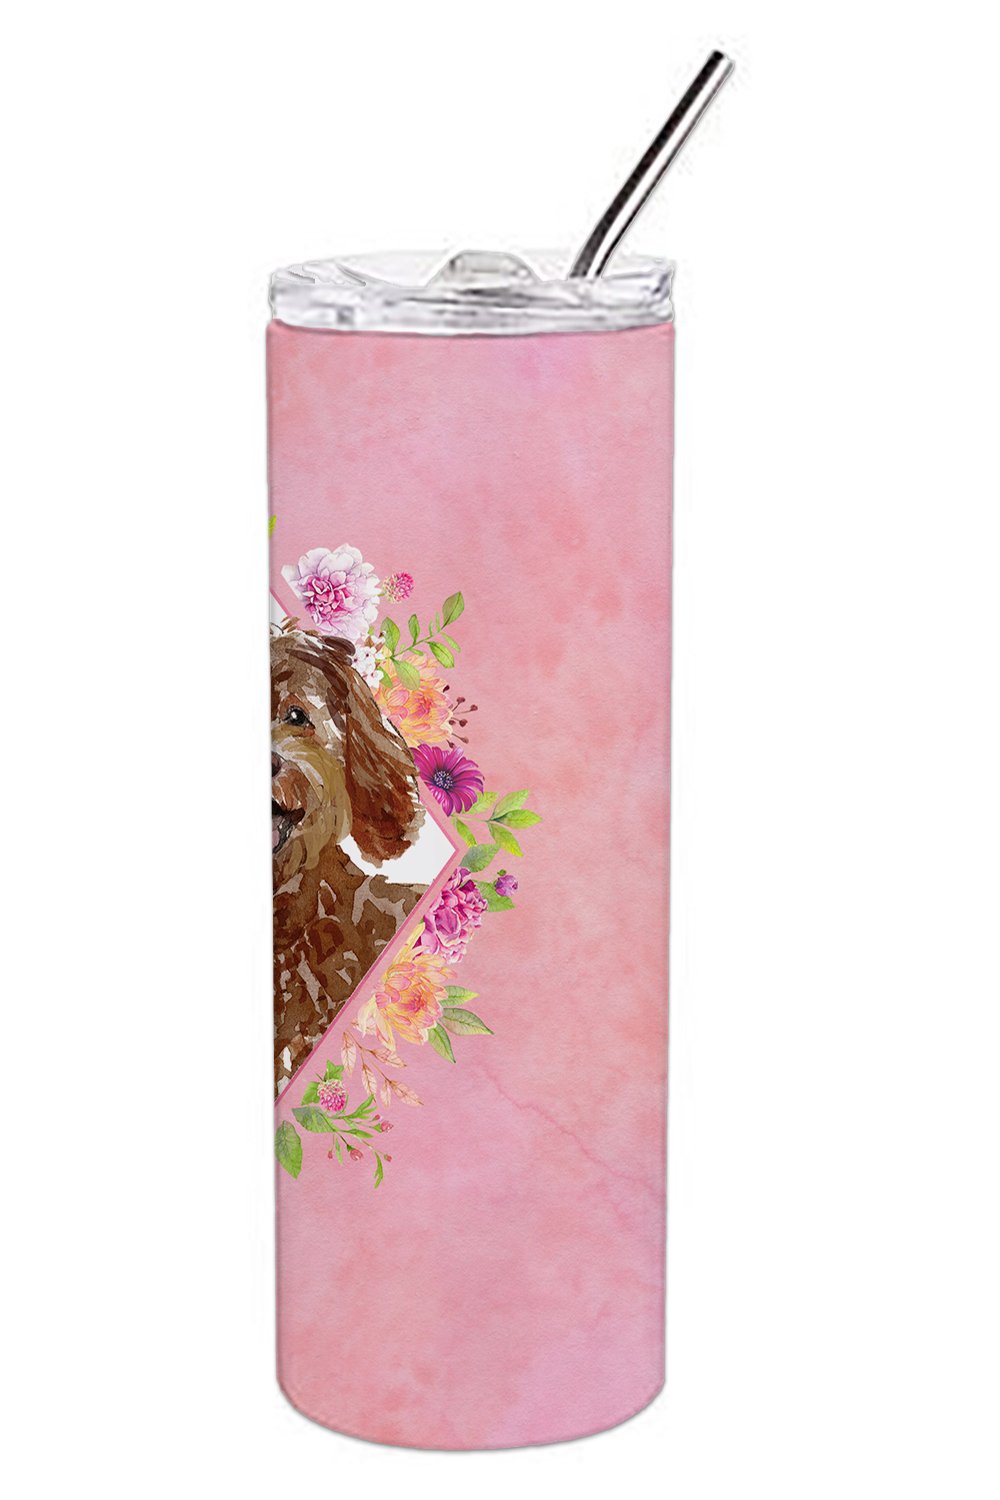 Labradoodle Pink Flowers Double Walled Stainless Steel 20 oz Skinny Tumbler CK4228TBL20 by Caroline's Treasures